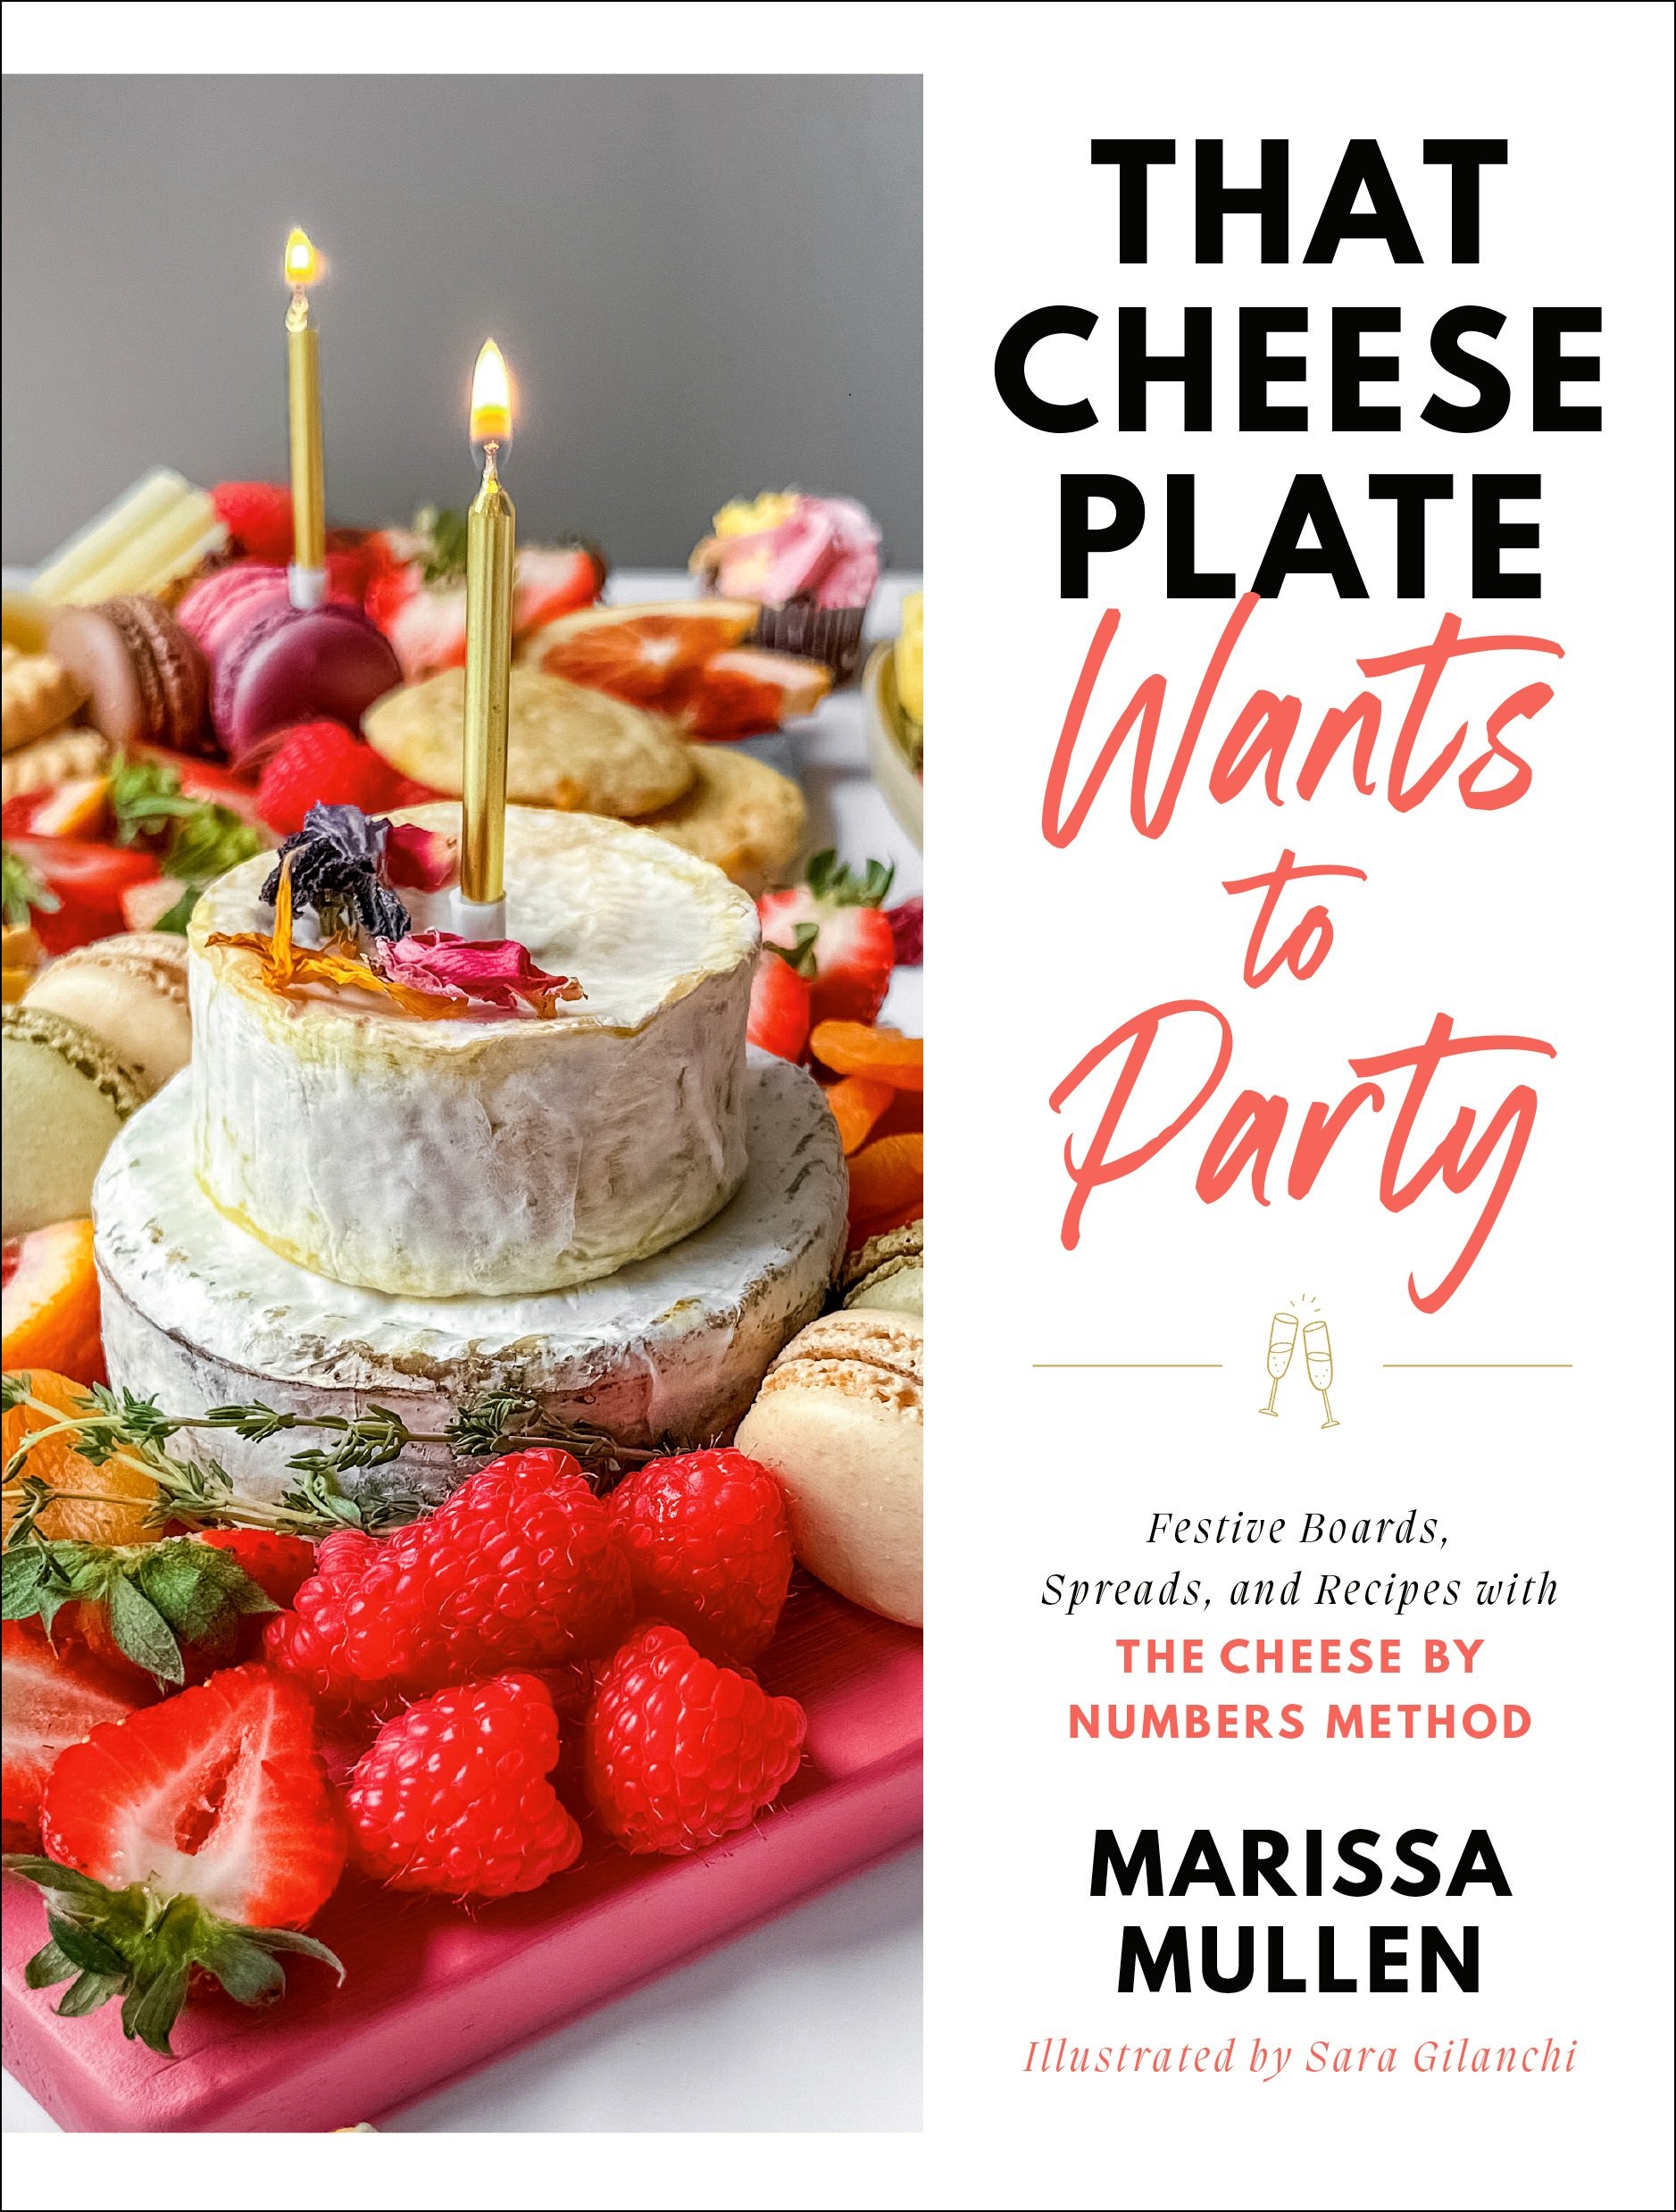 THAT CHEESE PLATE WANTS TO PARTY_FinalCover.jpg